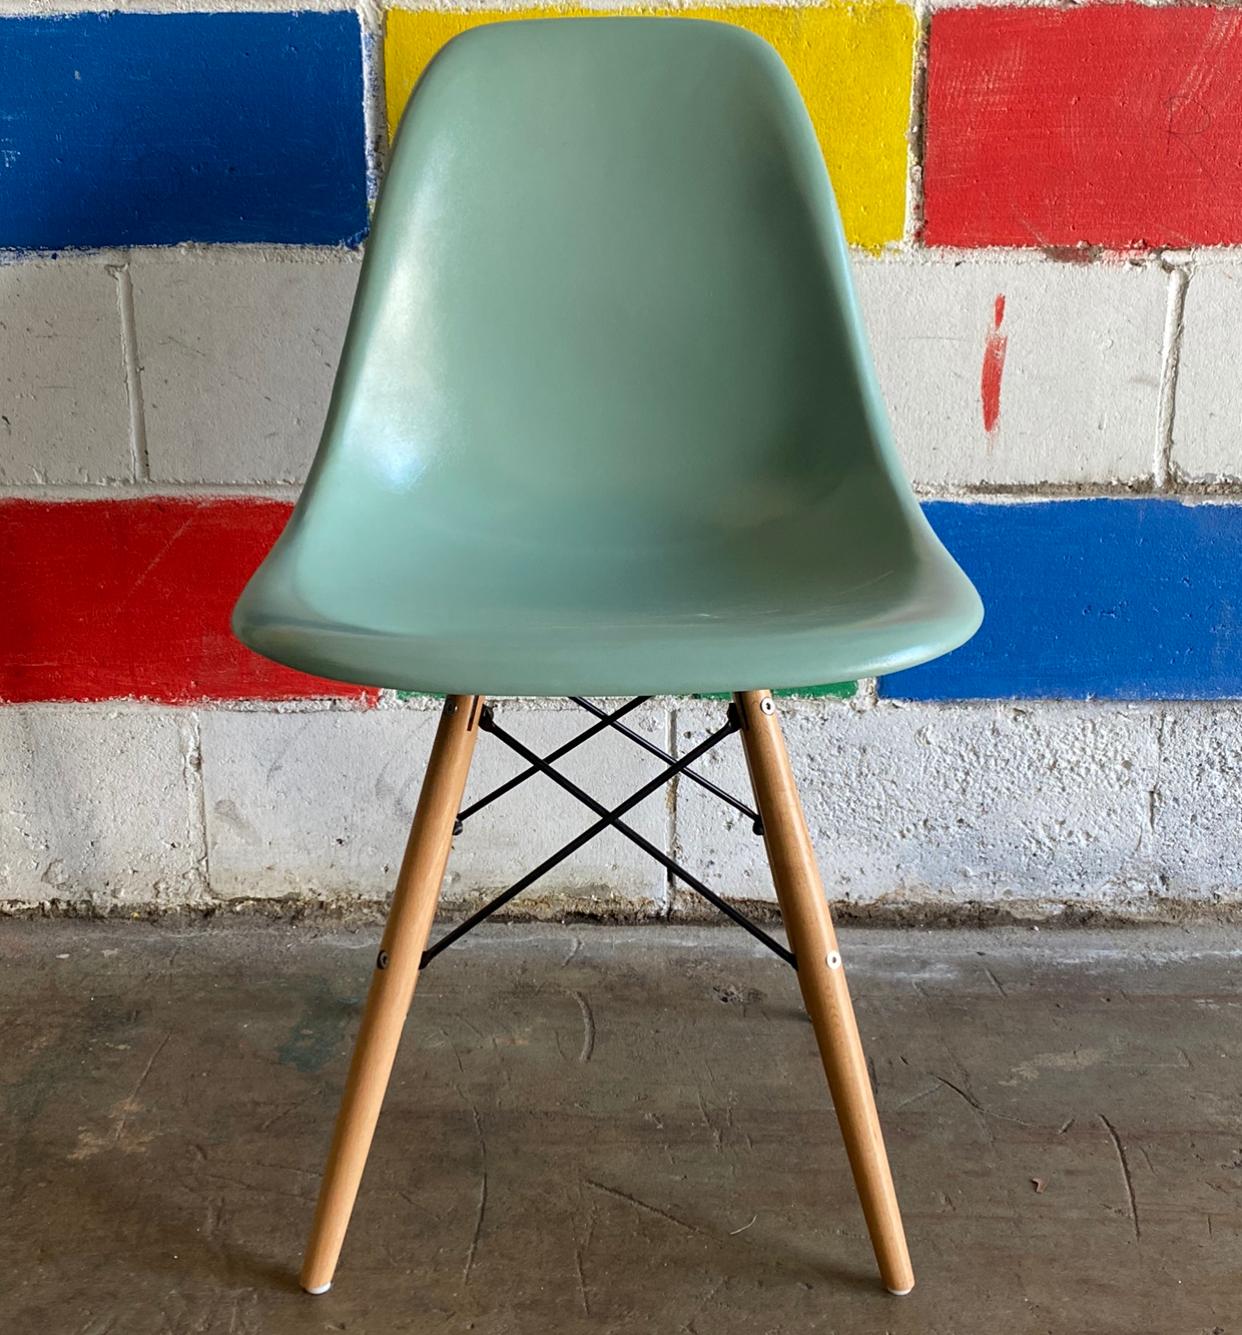 Set of 4 Herman Miller Eames dining chairs recoated in seafoam green. Authentic signed shells sit atop new wooden dowel bases. No cracks to the chairs.